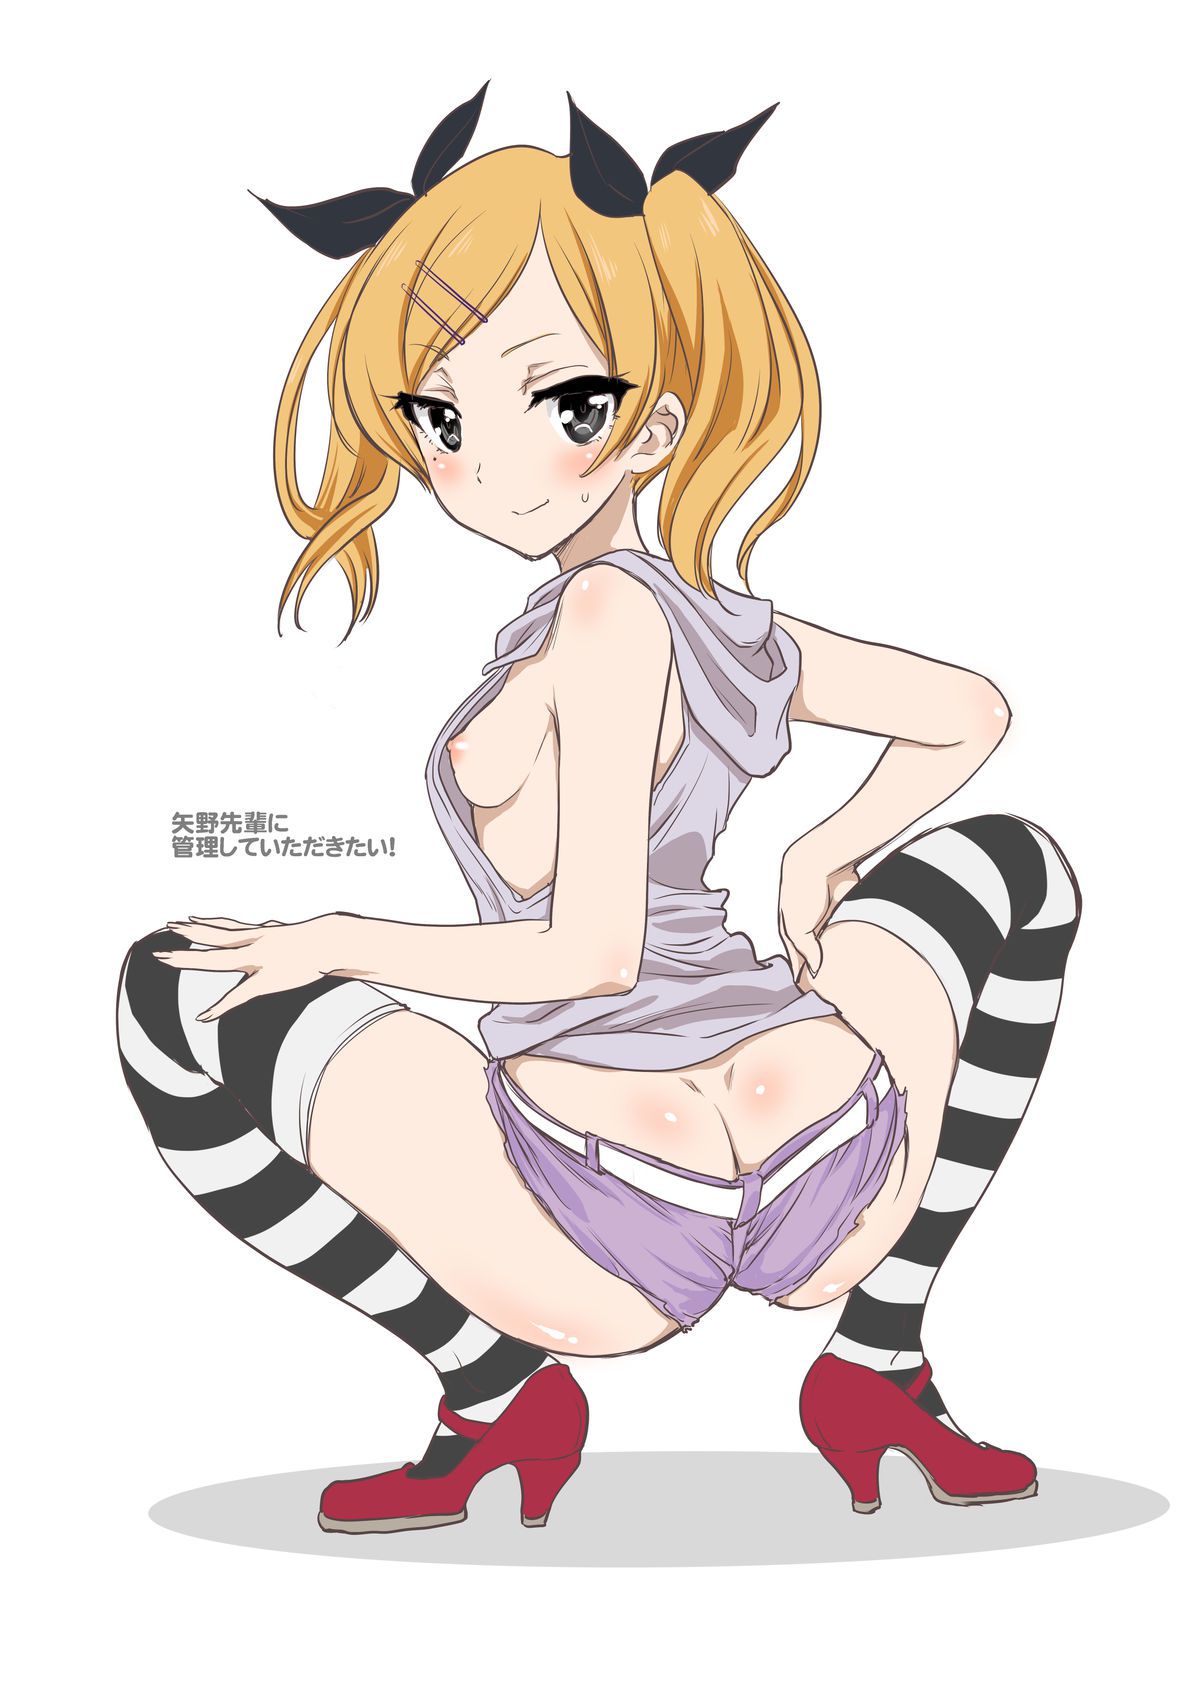 [SHIROBAKO] I will post erotic cute images of Erika Yano together for free ☆ 26